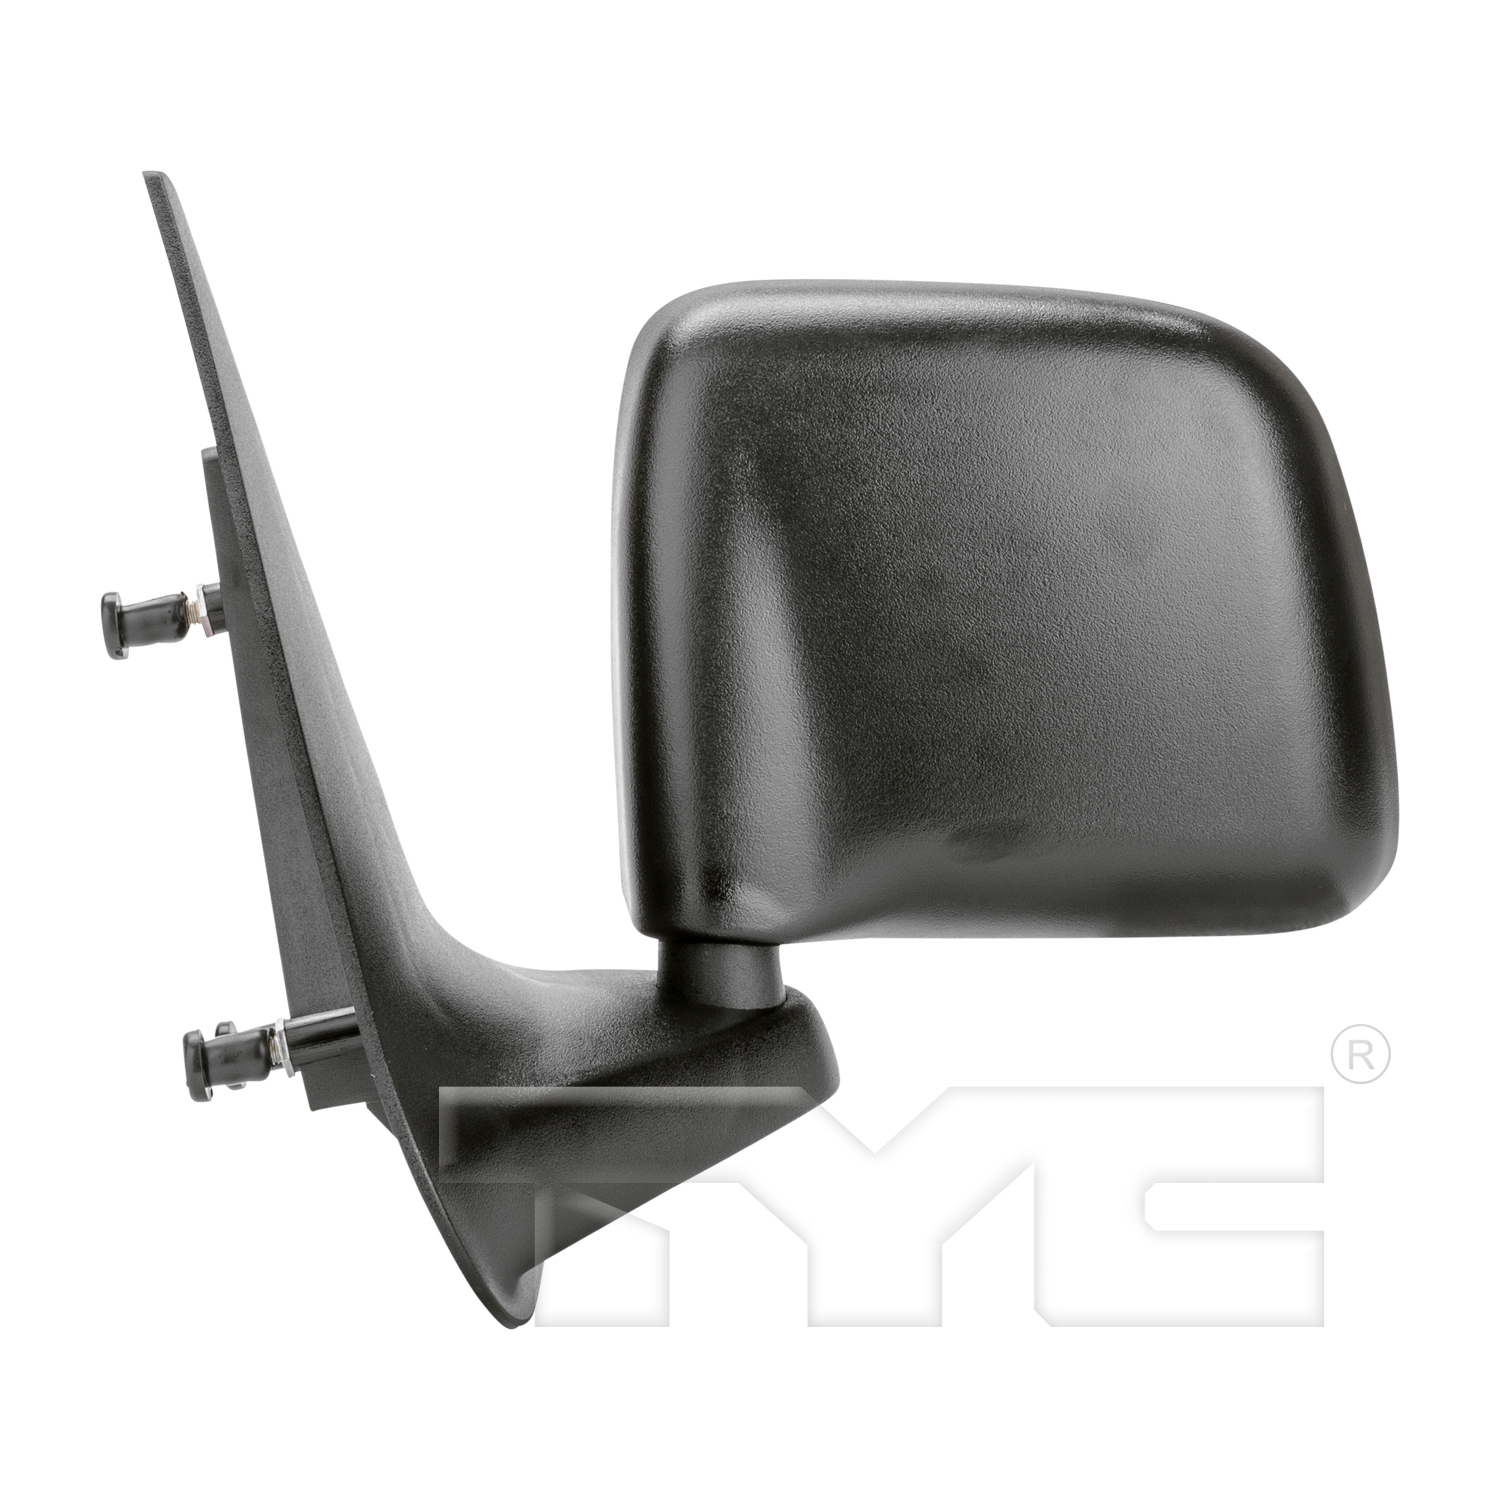 Aftermarket MIRRORS for MAZDA - B3000, B3000,94-98,LT Mirror outside rear view